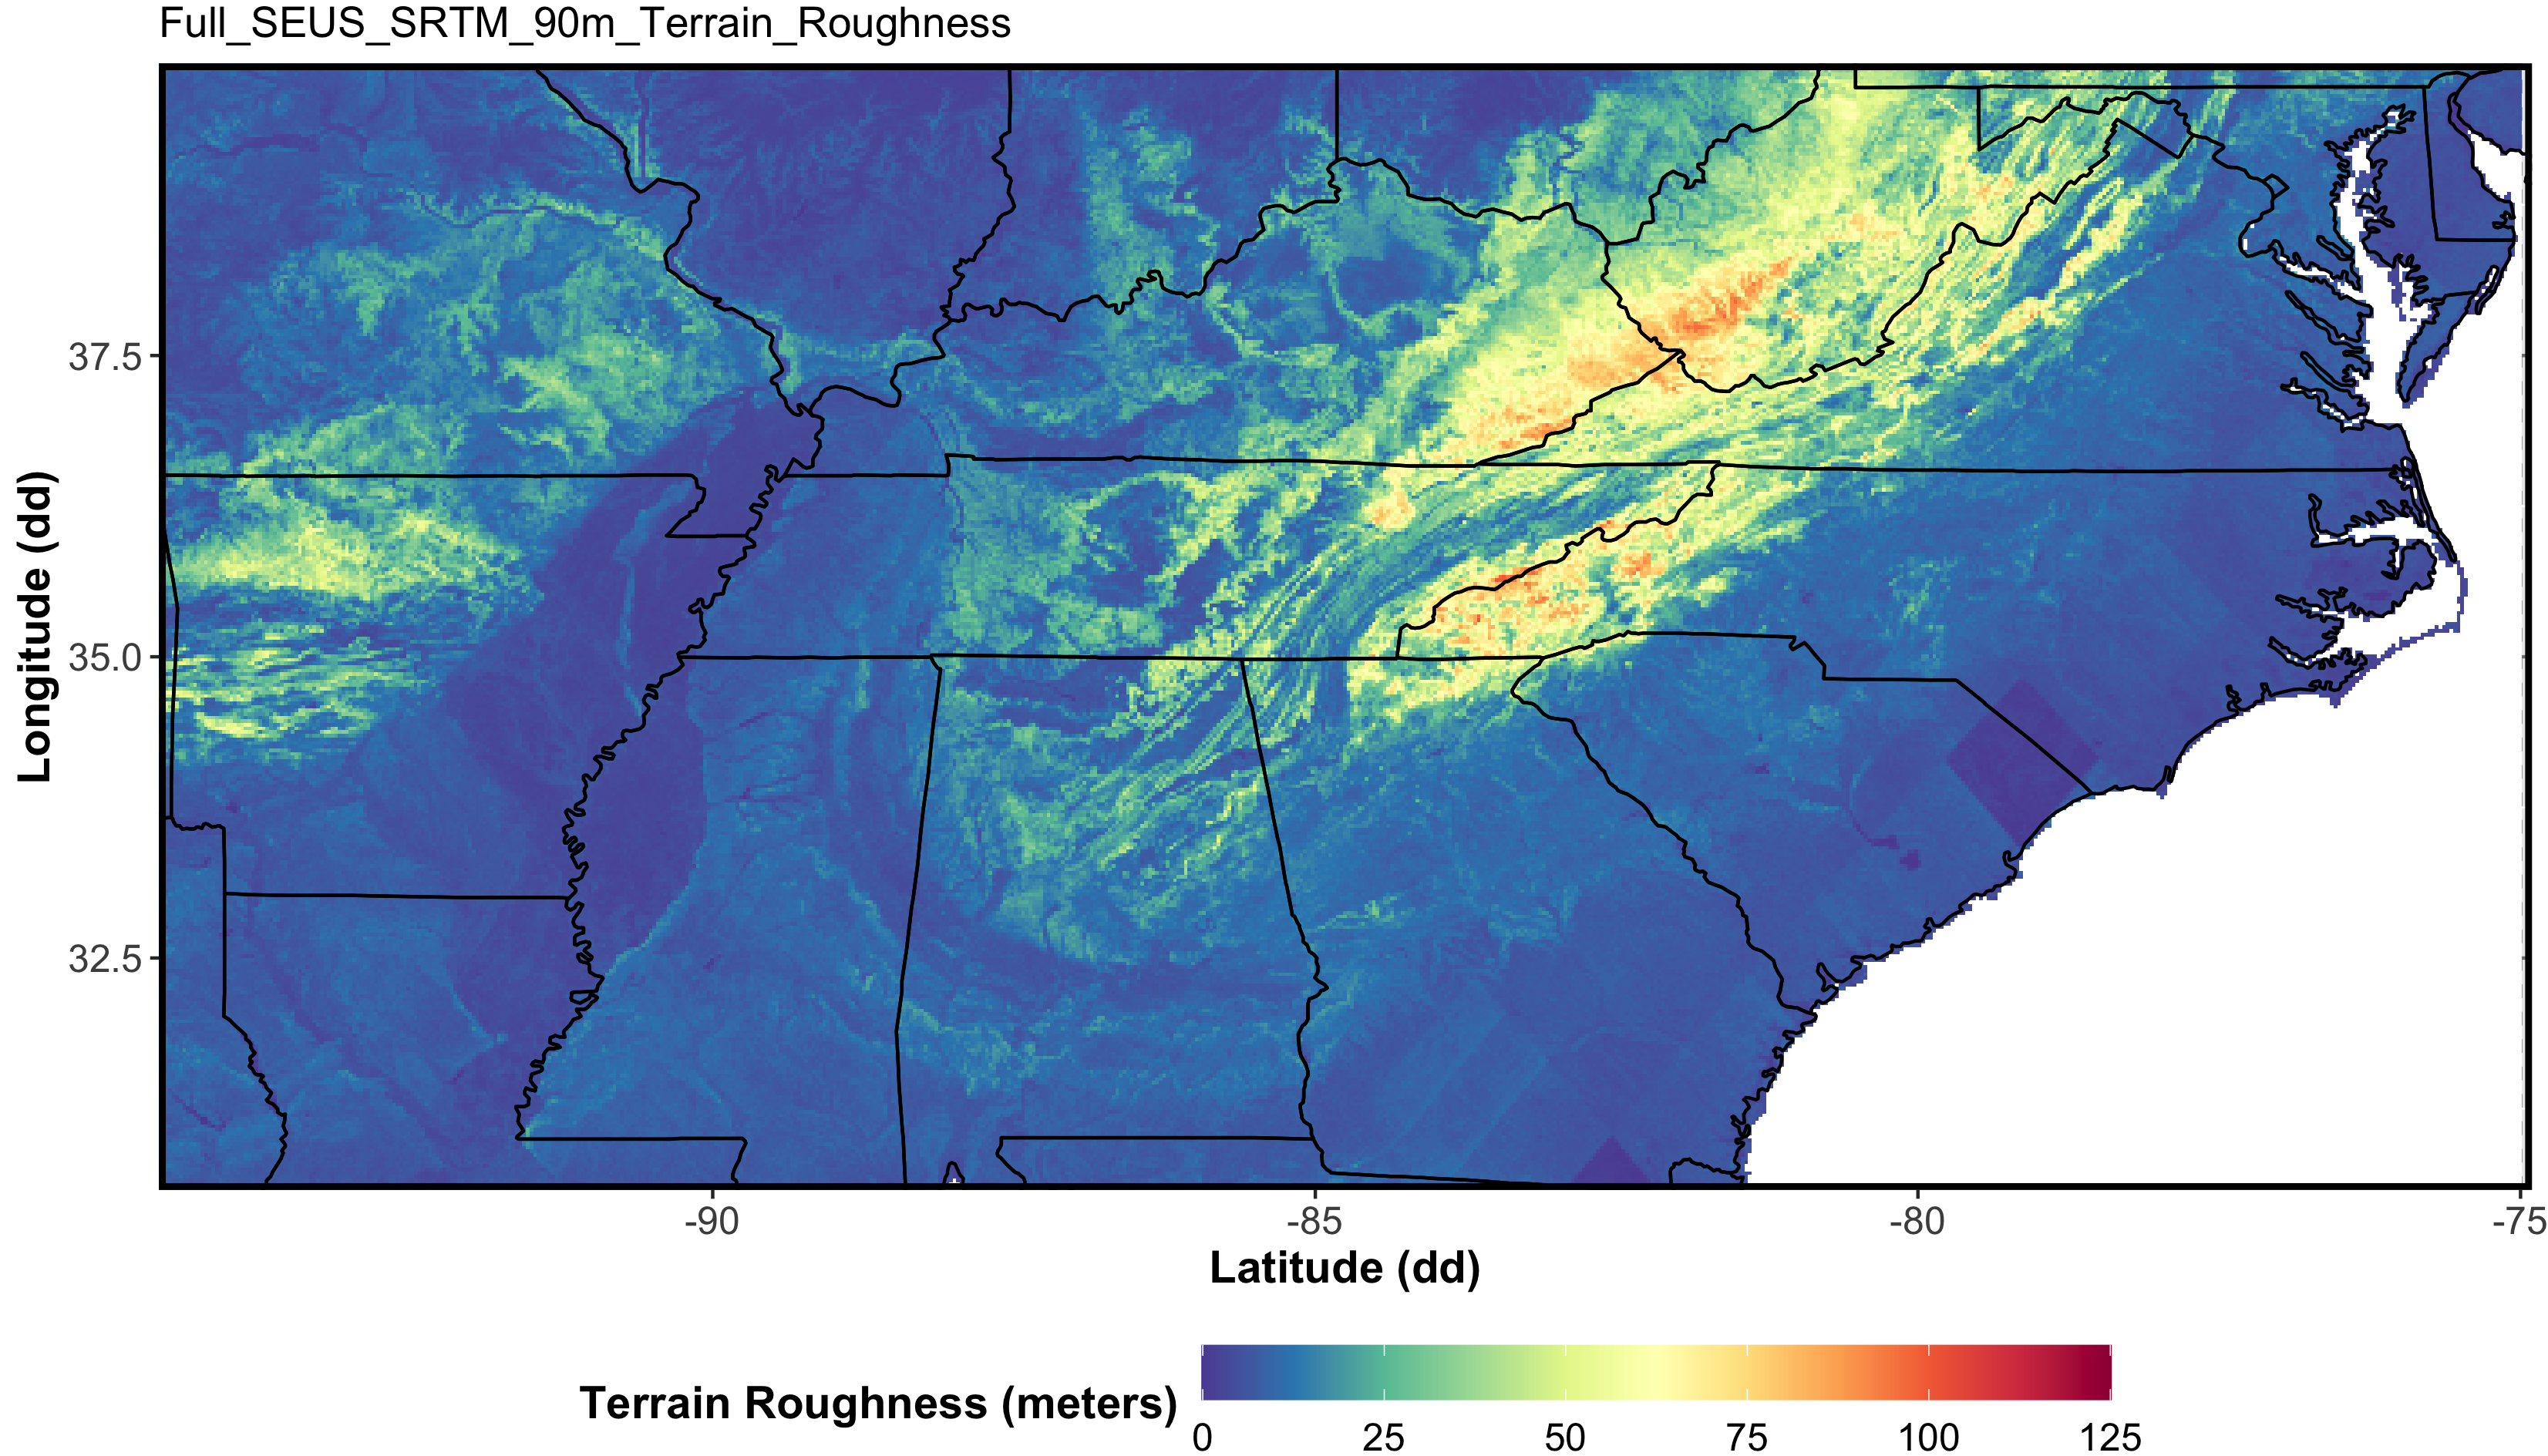 Map shows terrain roughness/complexity in Southeastern United States